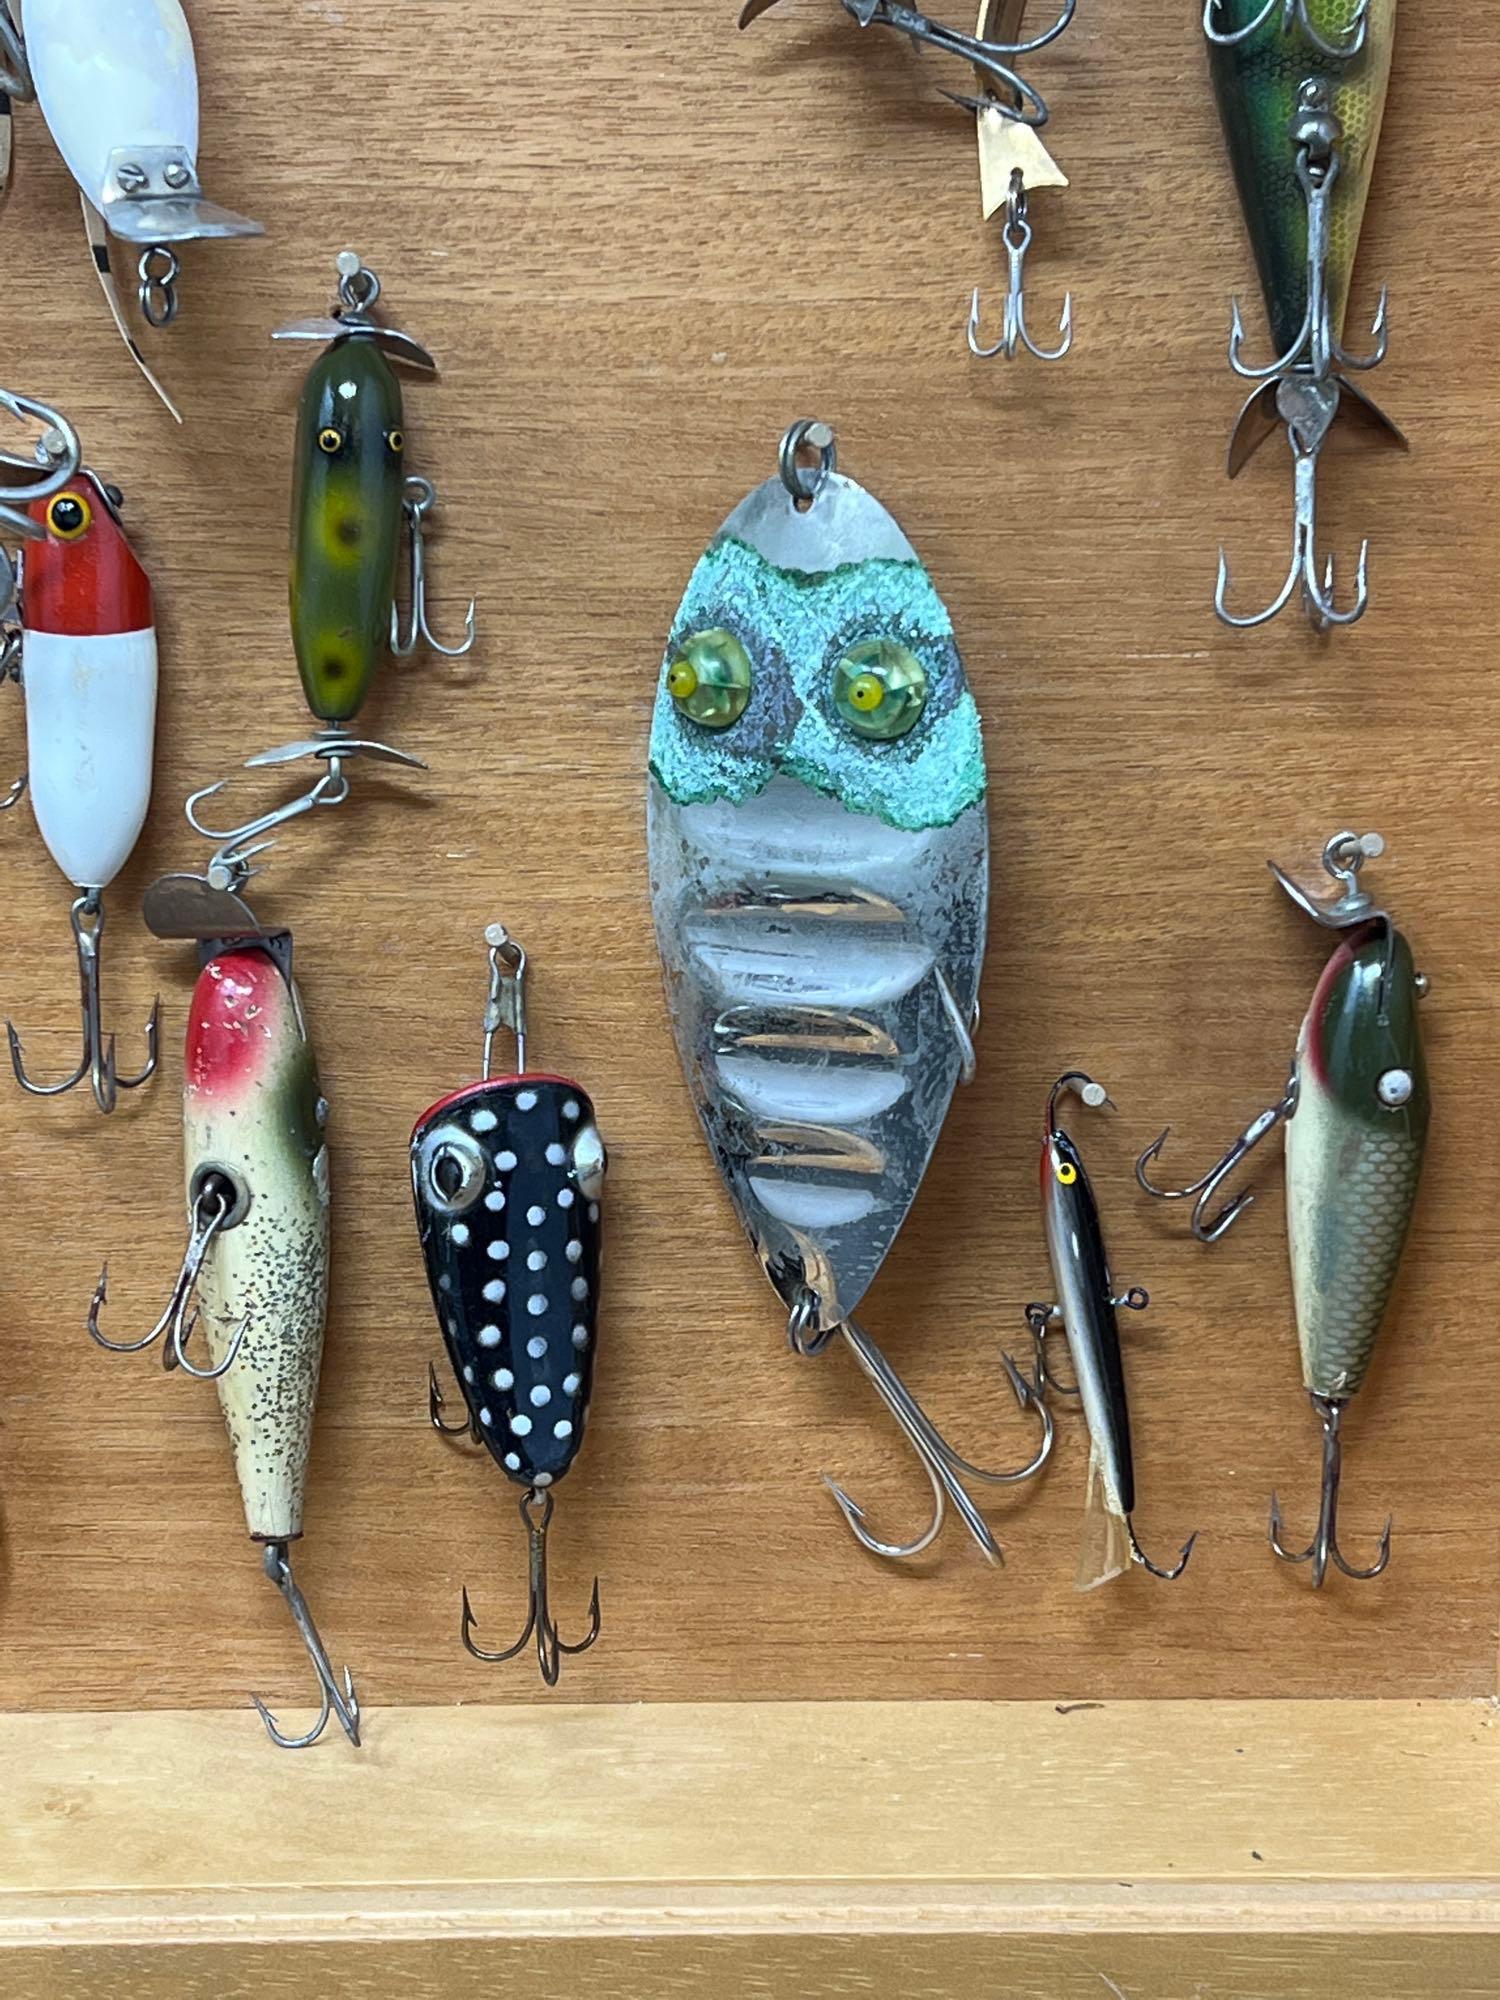 Cased Vintage Fishing Lure Collection with Brass